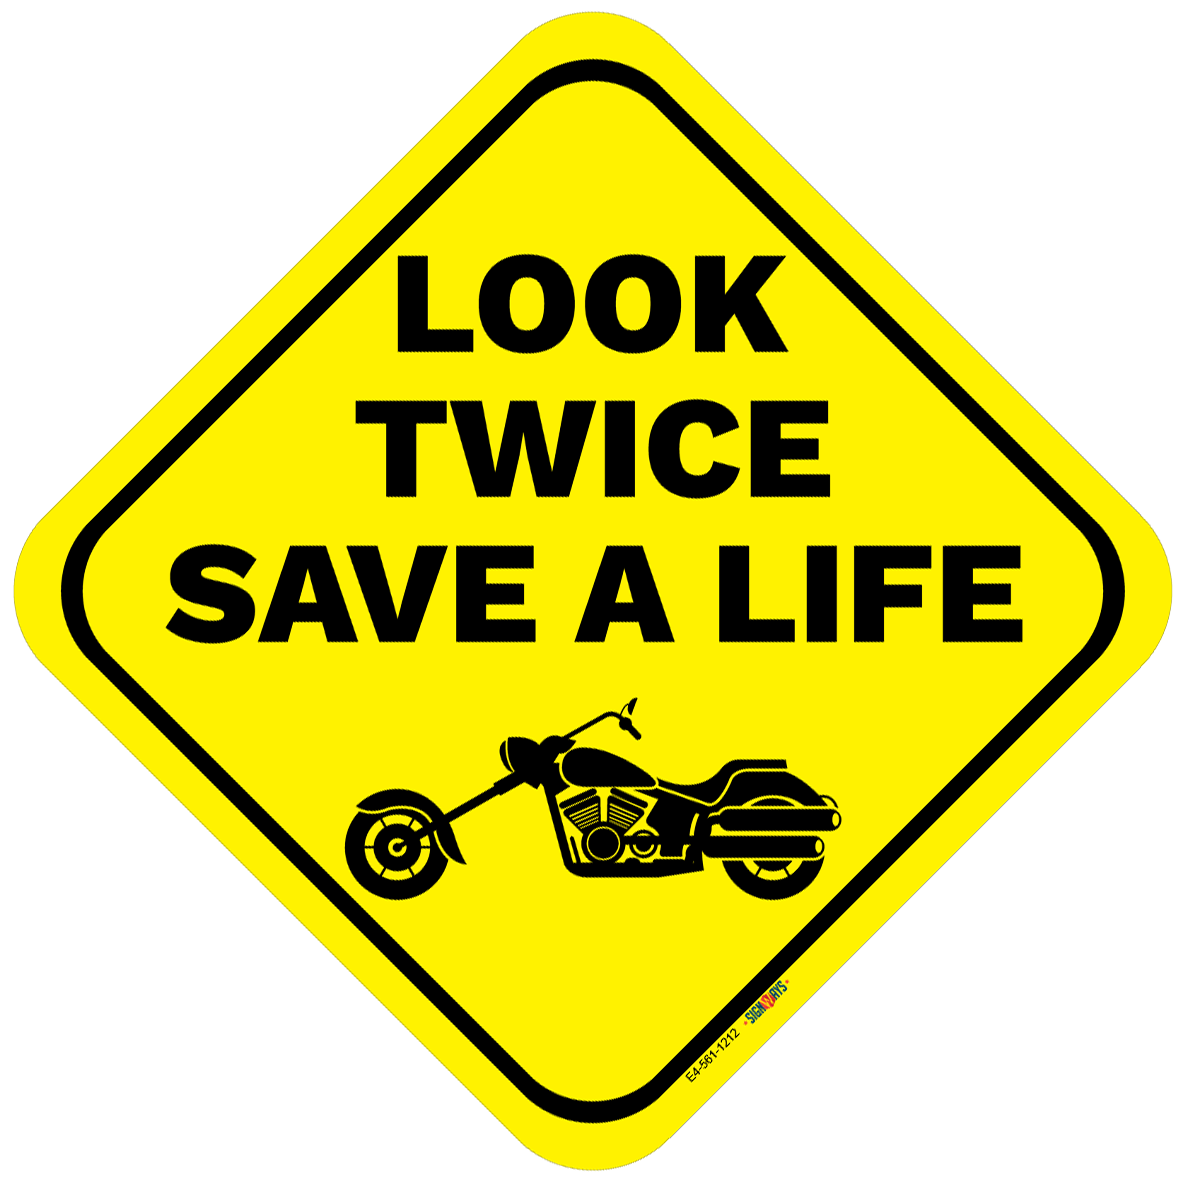 Look Twice, Save A Life (Chopper Motorcycle Image) Sign